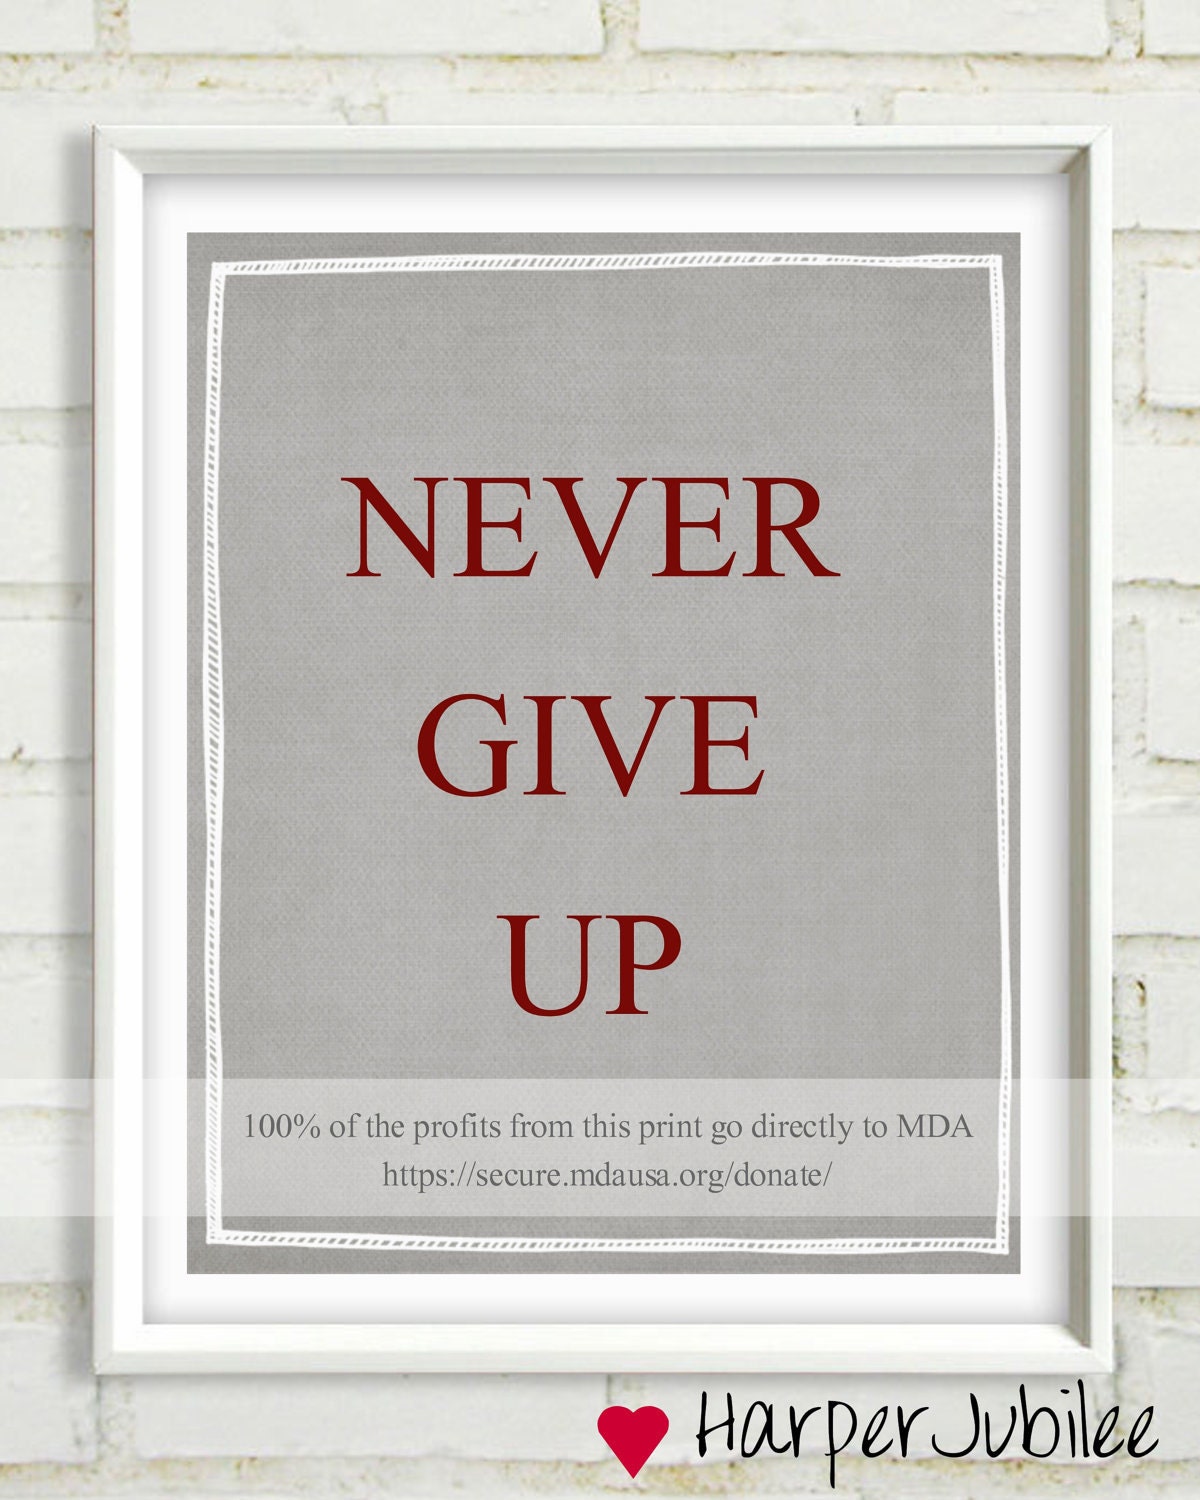 Never Give Up Muscular Dystrophy Charitable Donation Art Print  Duchenne 8x10 printable pick your colors